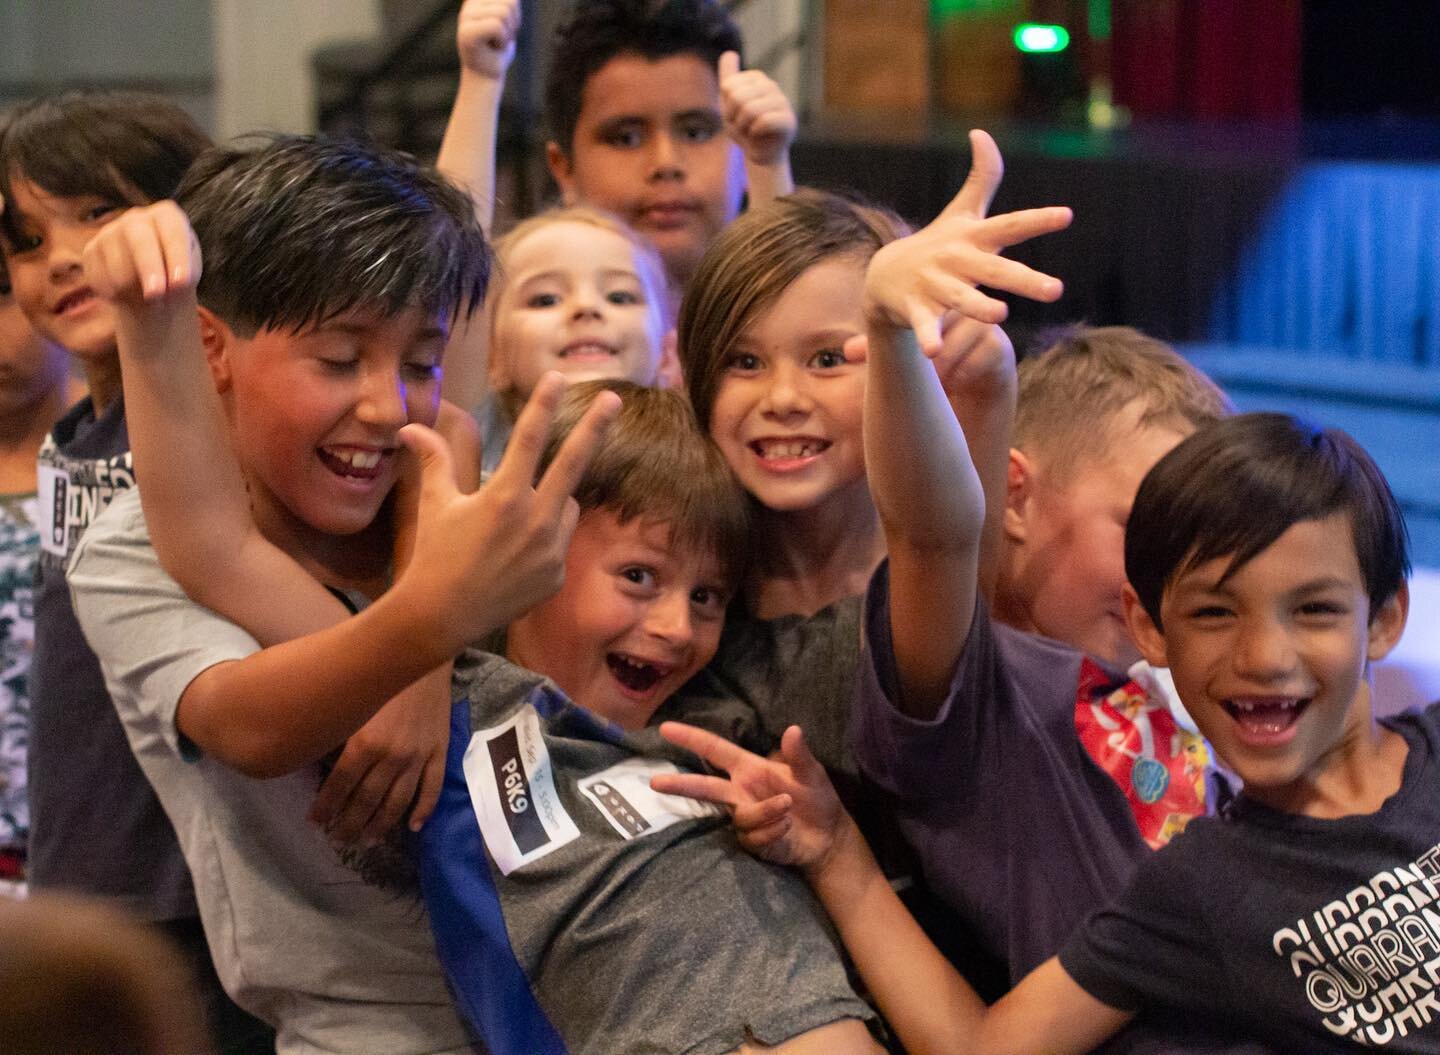 We want to hang out with you! Join us tonight at 6:30 for some awesome fun!🥳
.
#kidcity #kidschurch #childrenschurch #churchinmanteca #Mantecaca #cornerstonechurch #cornerstonemanteca  #kidsministries #sundayschool #kidmin #kids #children #church #c